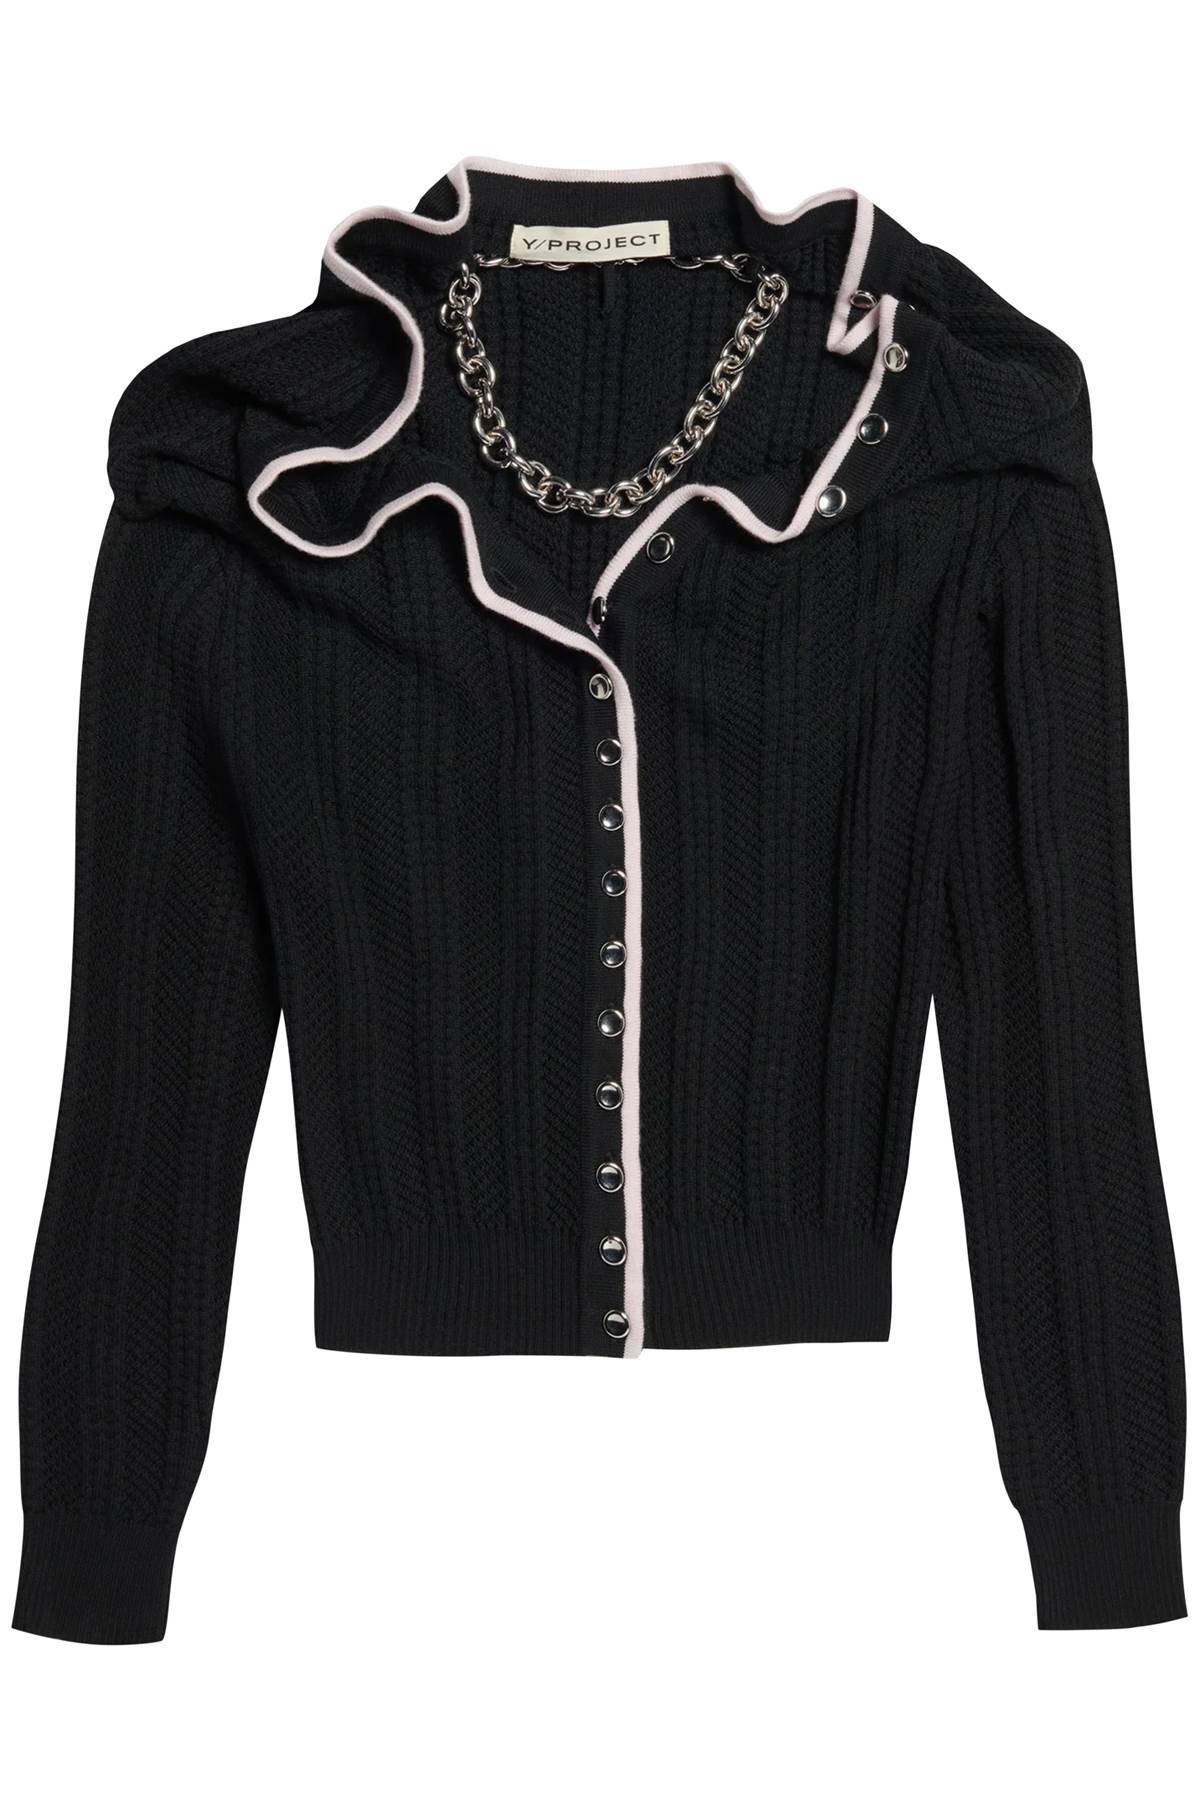 Y Project Merino Wool Cardigan With Necklace Women